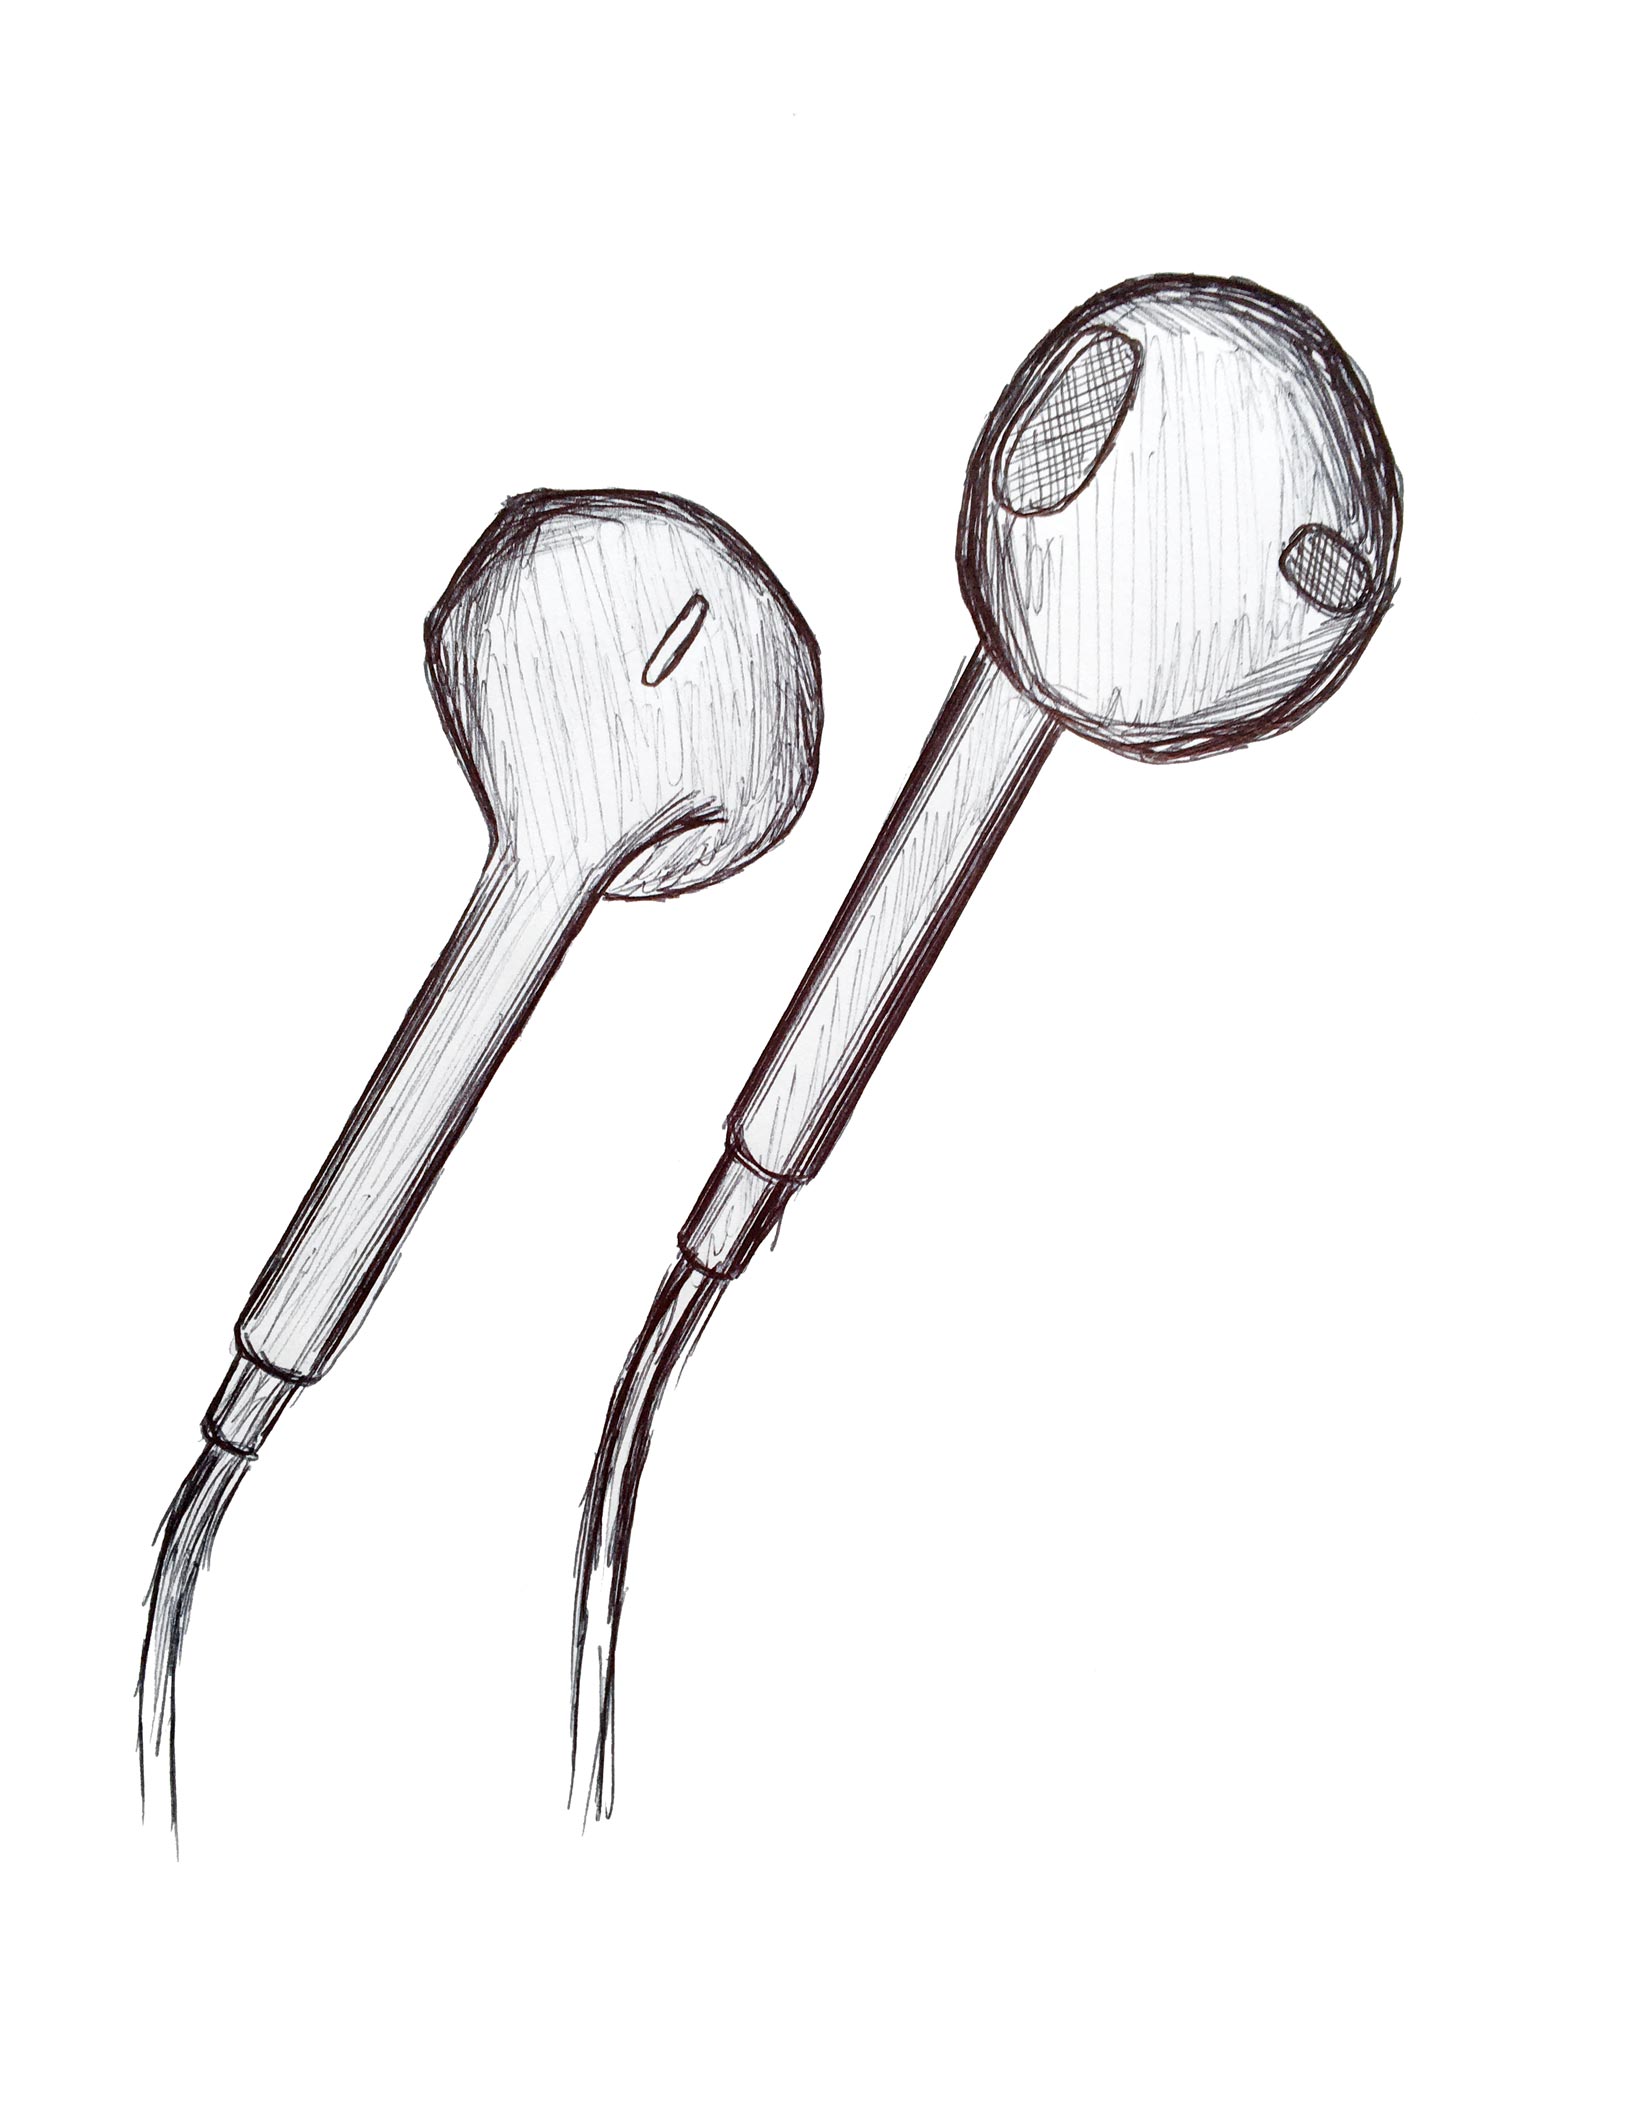 Sketch of earphones for photography brief